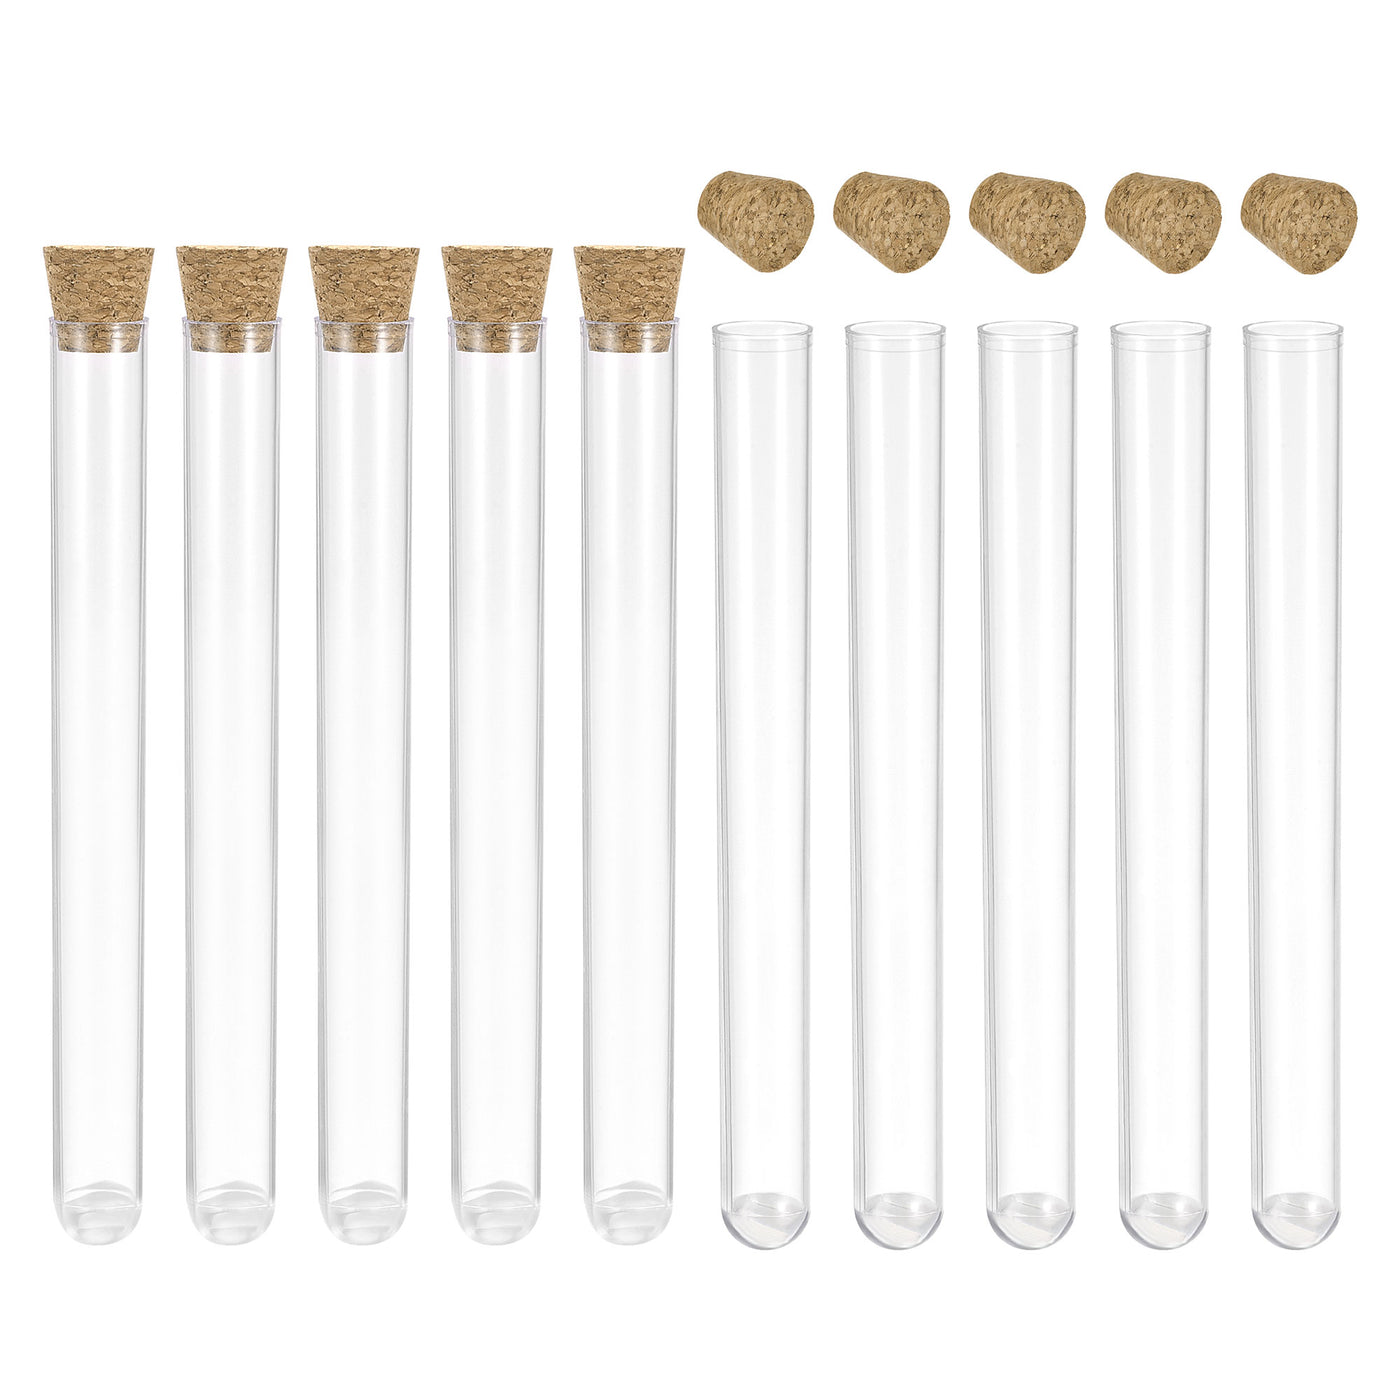 Uxcell Uxcell 20Pcs PS Plastic Test Tubes with Cork Stoppers, Round Base, 16x125mm